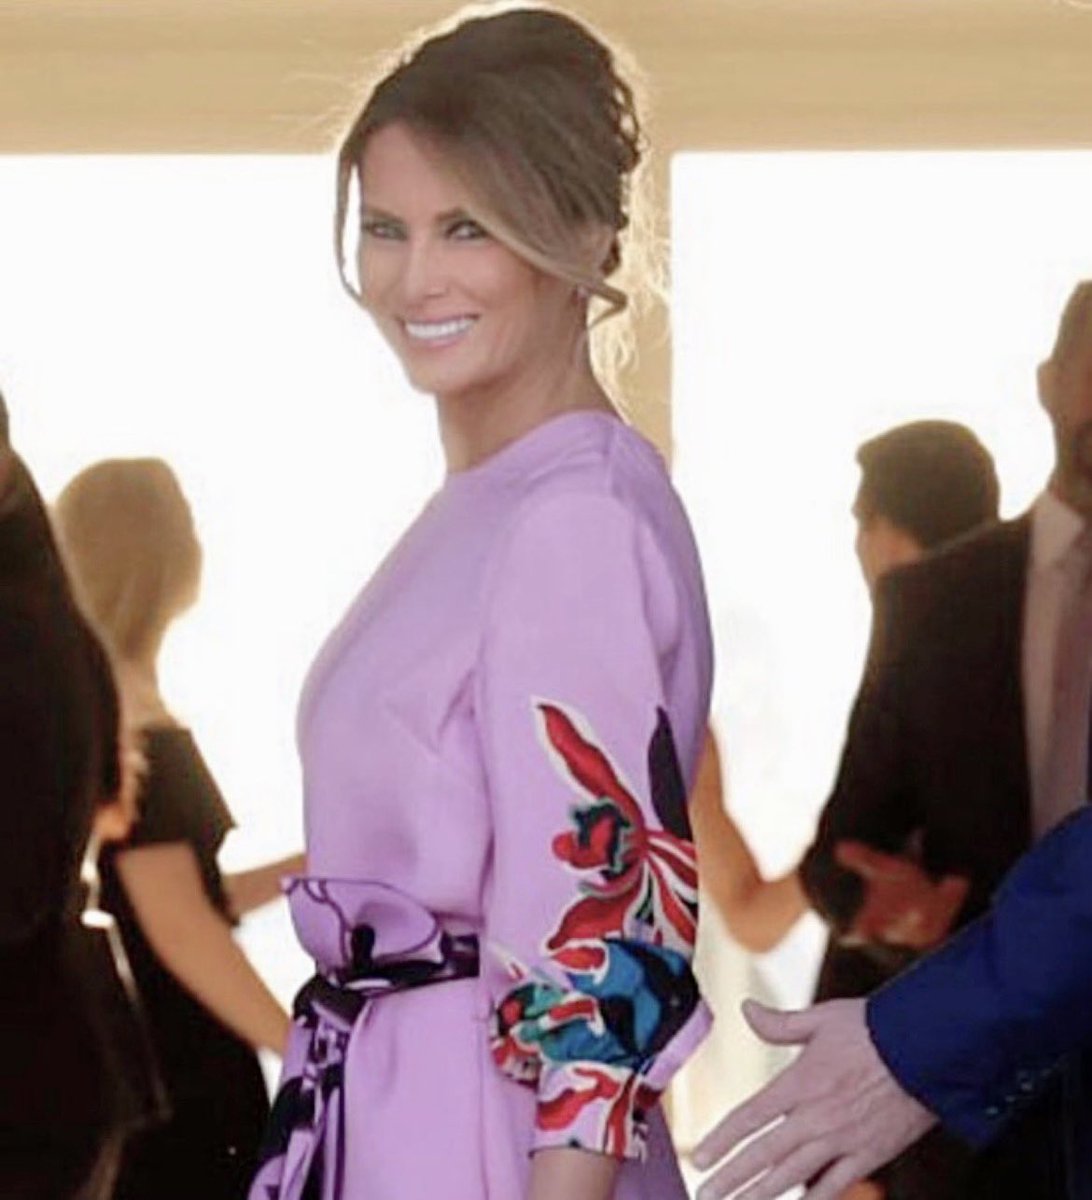 🌸Our Fabulous 45th First Lady Melania Trump Kind, Compassionate, Highly Intelligent, Patriotic, a Great Mother and Strong & Loving Support for the Greatest President ever ! #Trump2024 🇺🇸♥️ Donald Trump #TrumpGirlOnFire 🔥 #MelaniaTrump